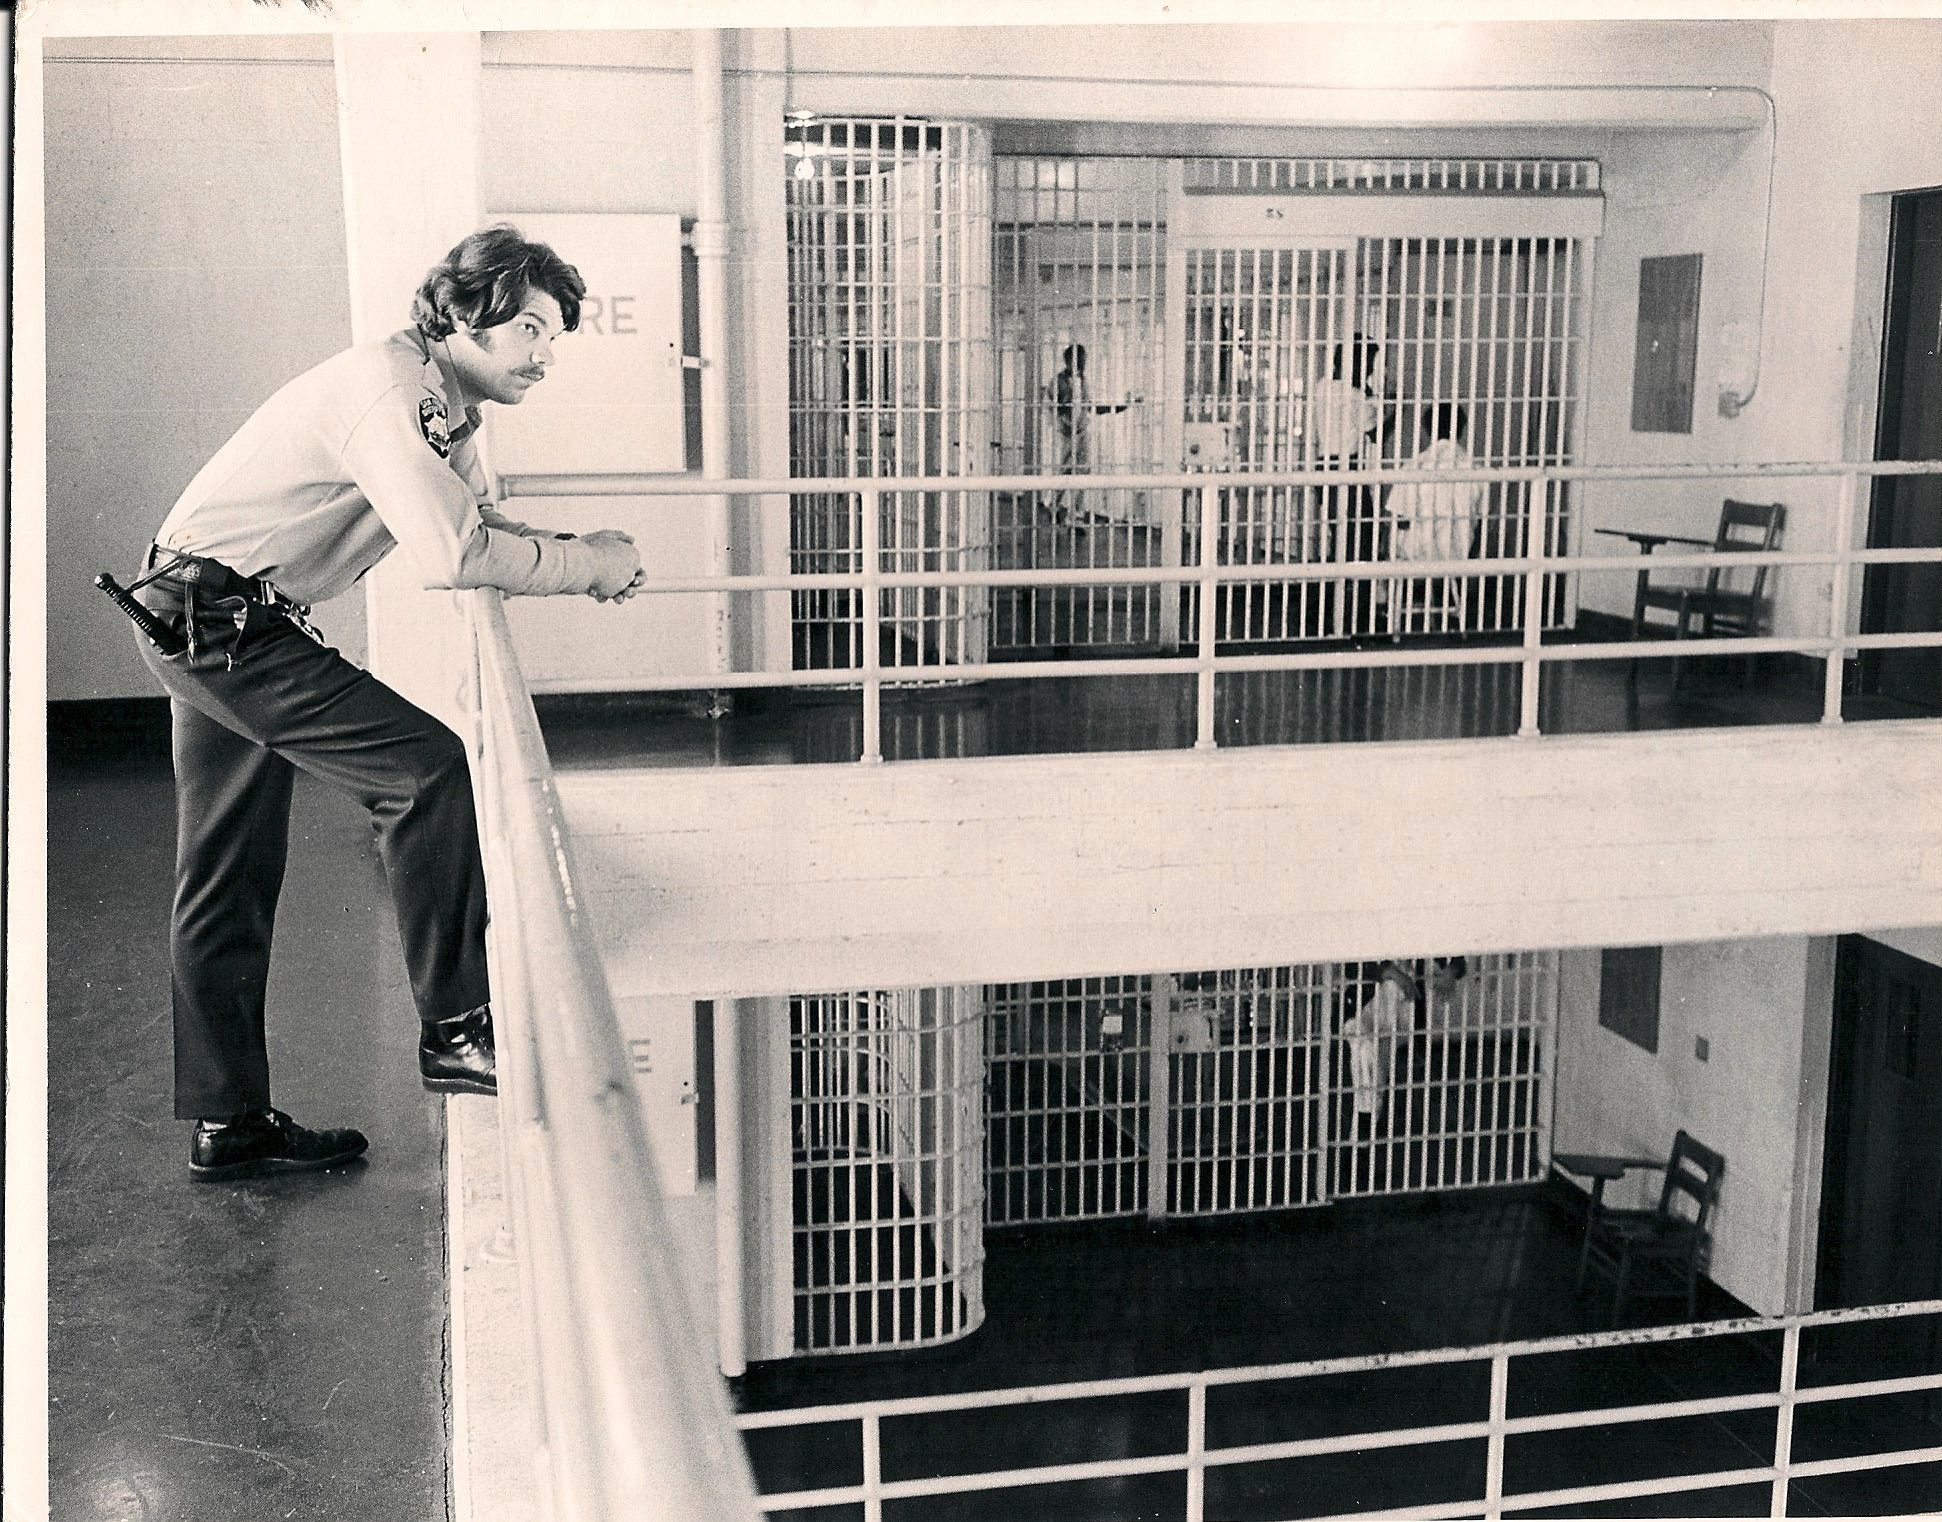 San Bruno “The Most Modern Jail in the World” Part 3 of 3 19692012